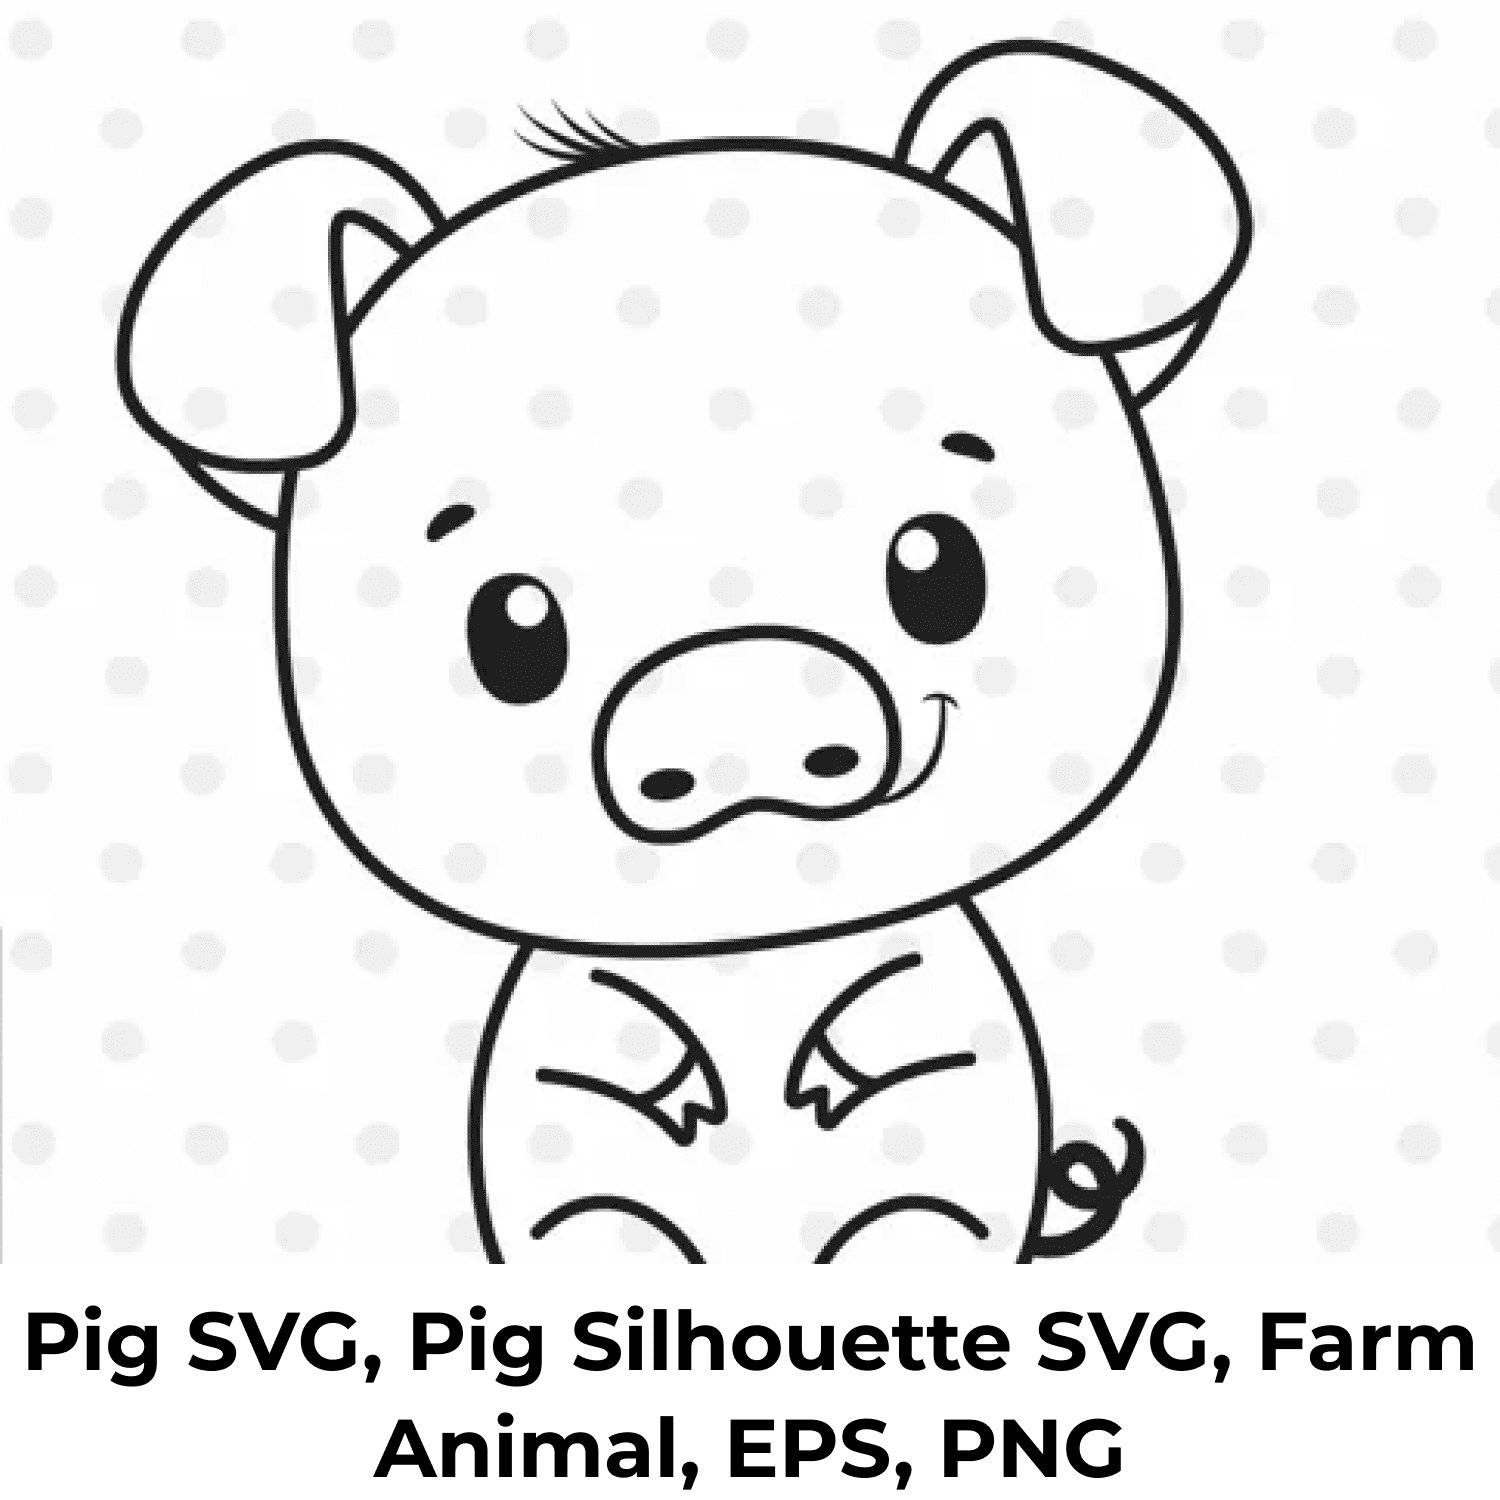 Pig SVG, Pig Silhouette SVG, Farm Animal, EPS, PNG cover.